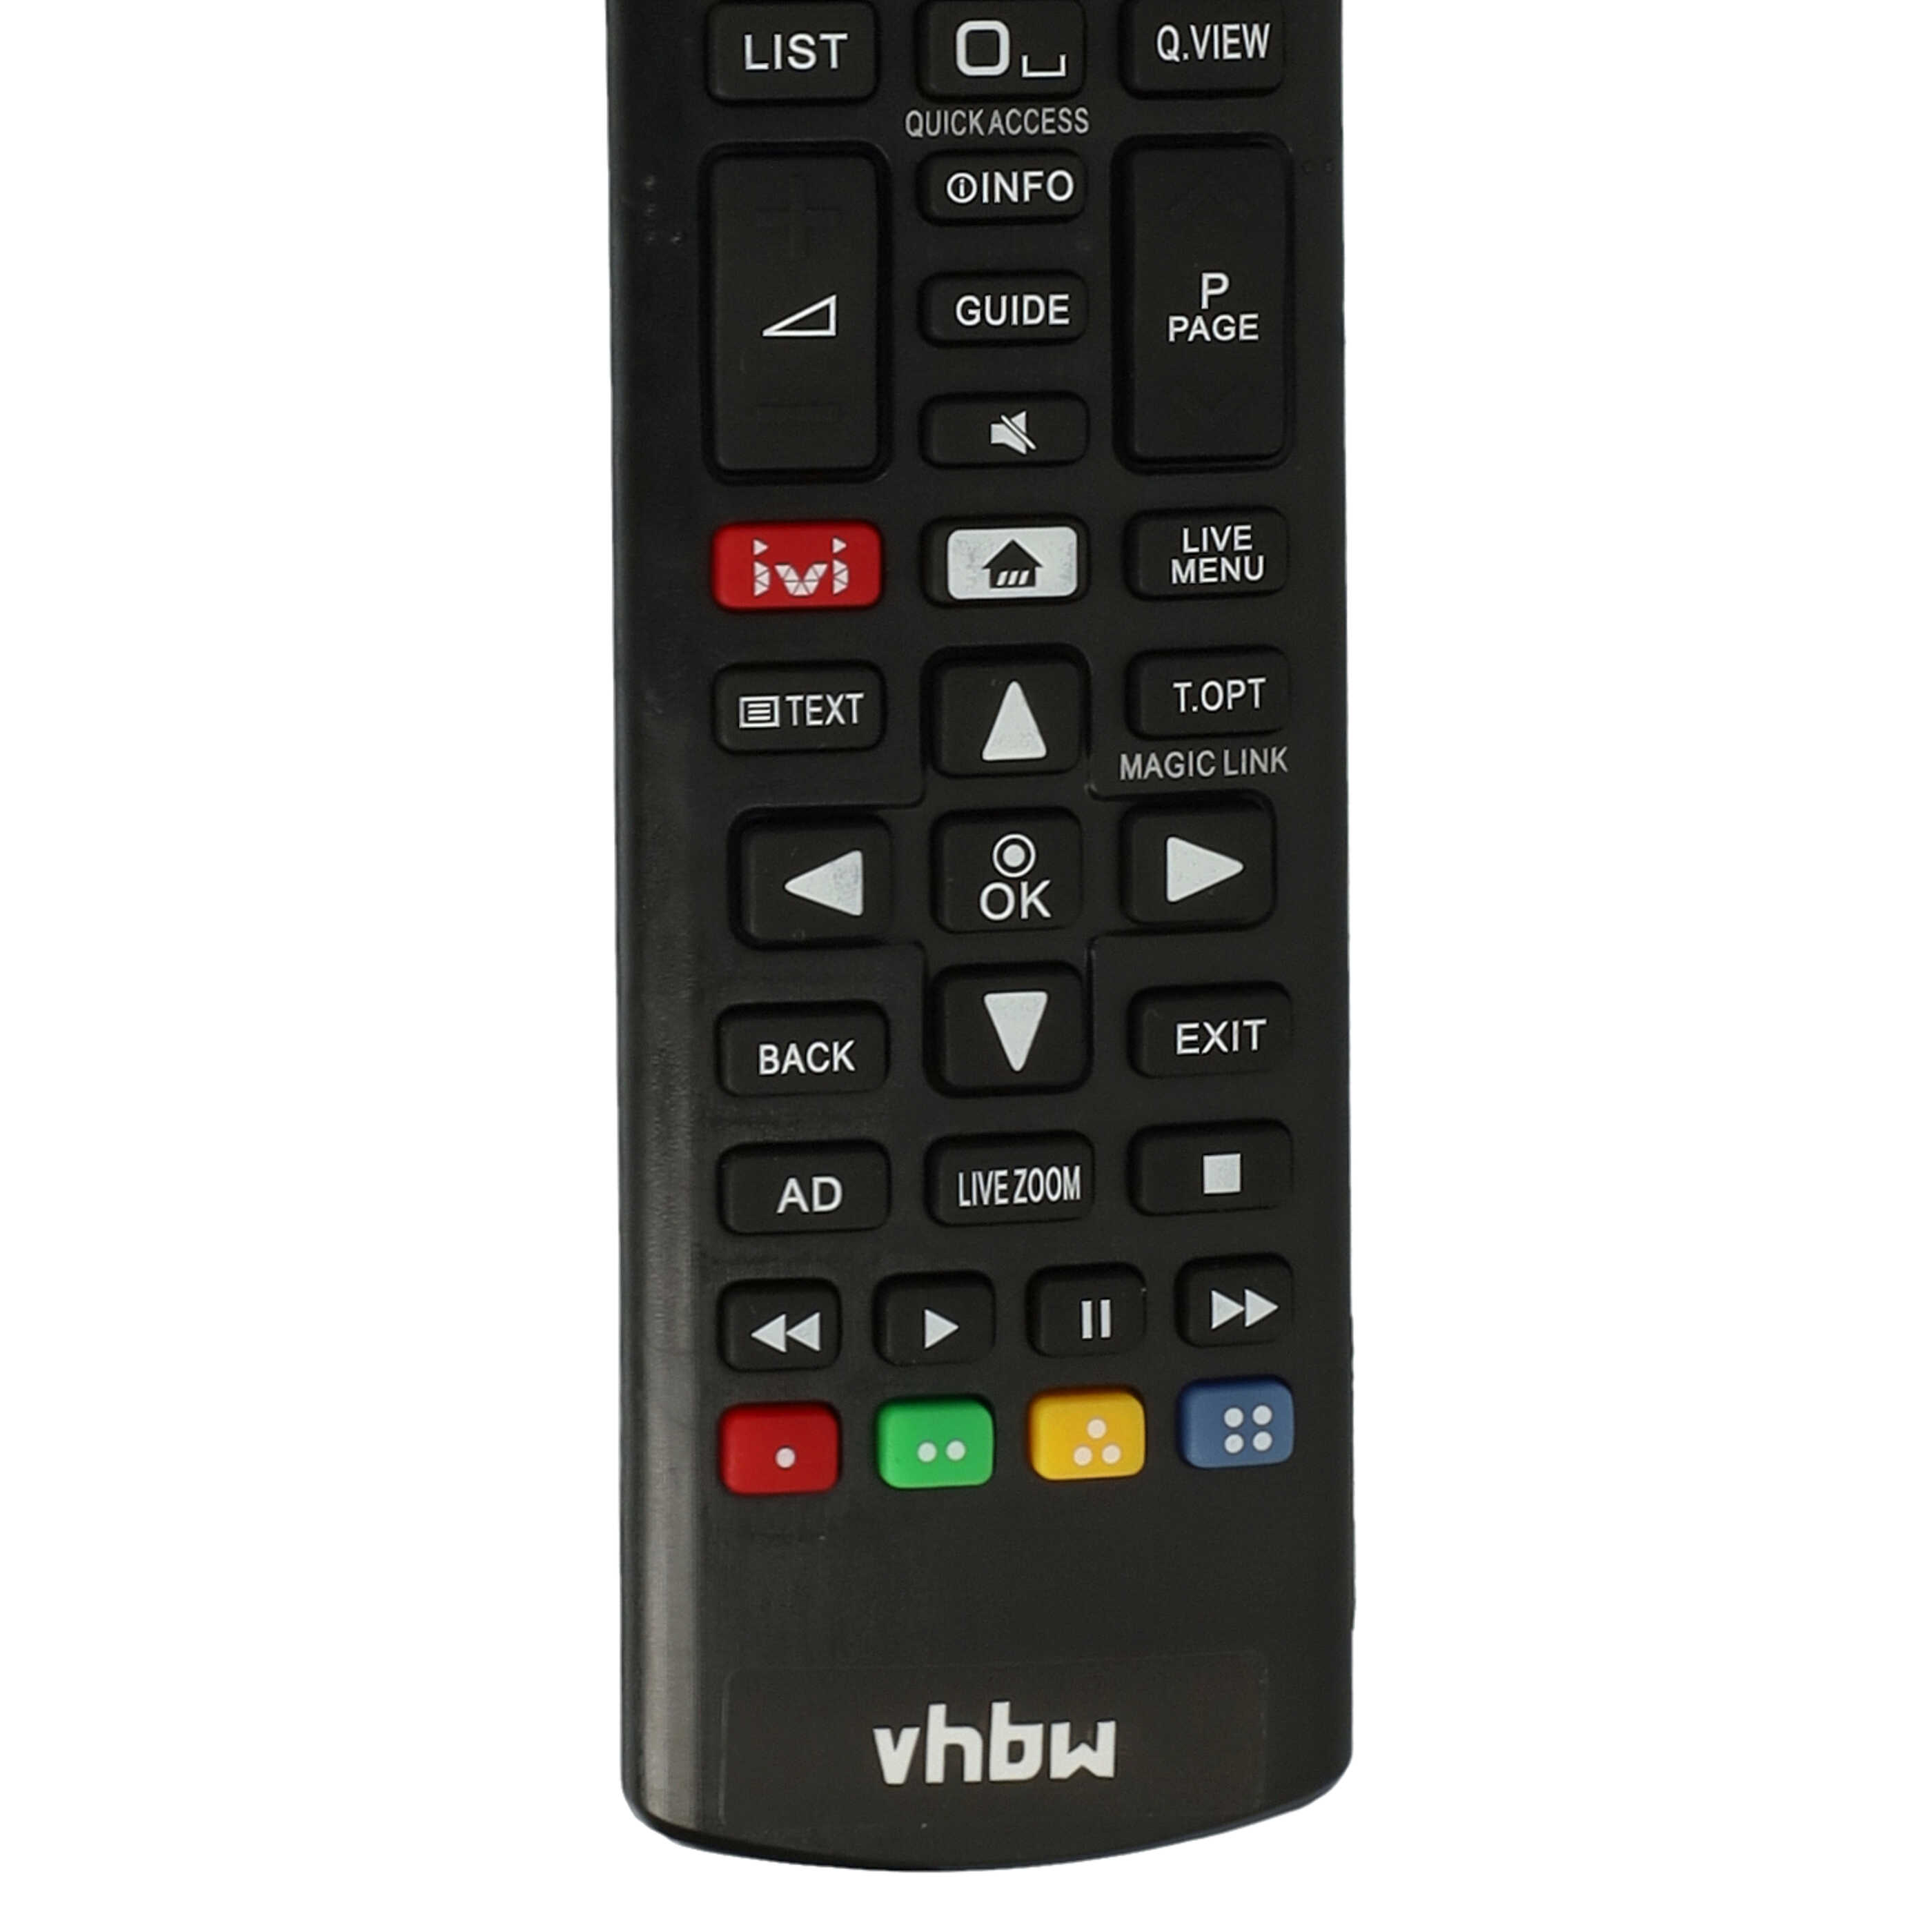 Remote Control replaces LG AKB75095312 for LG TV